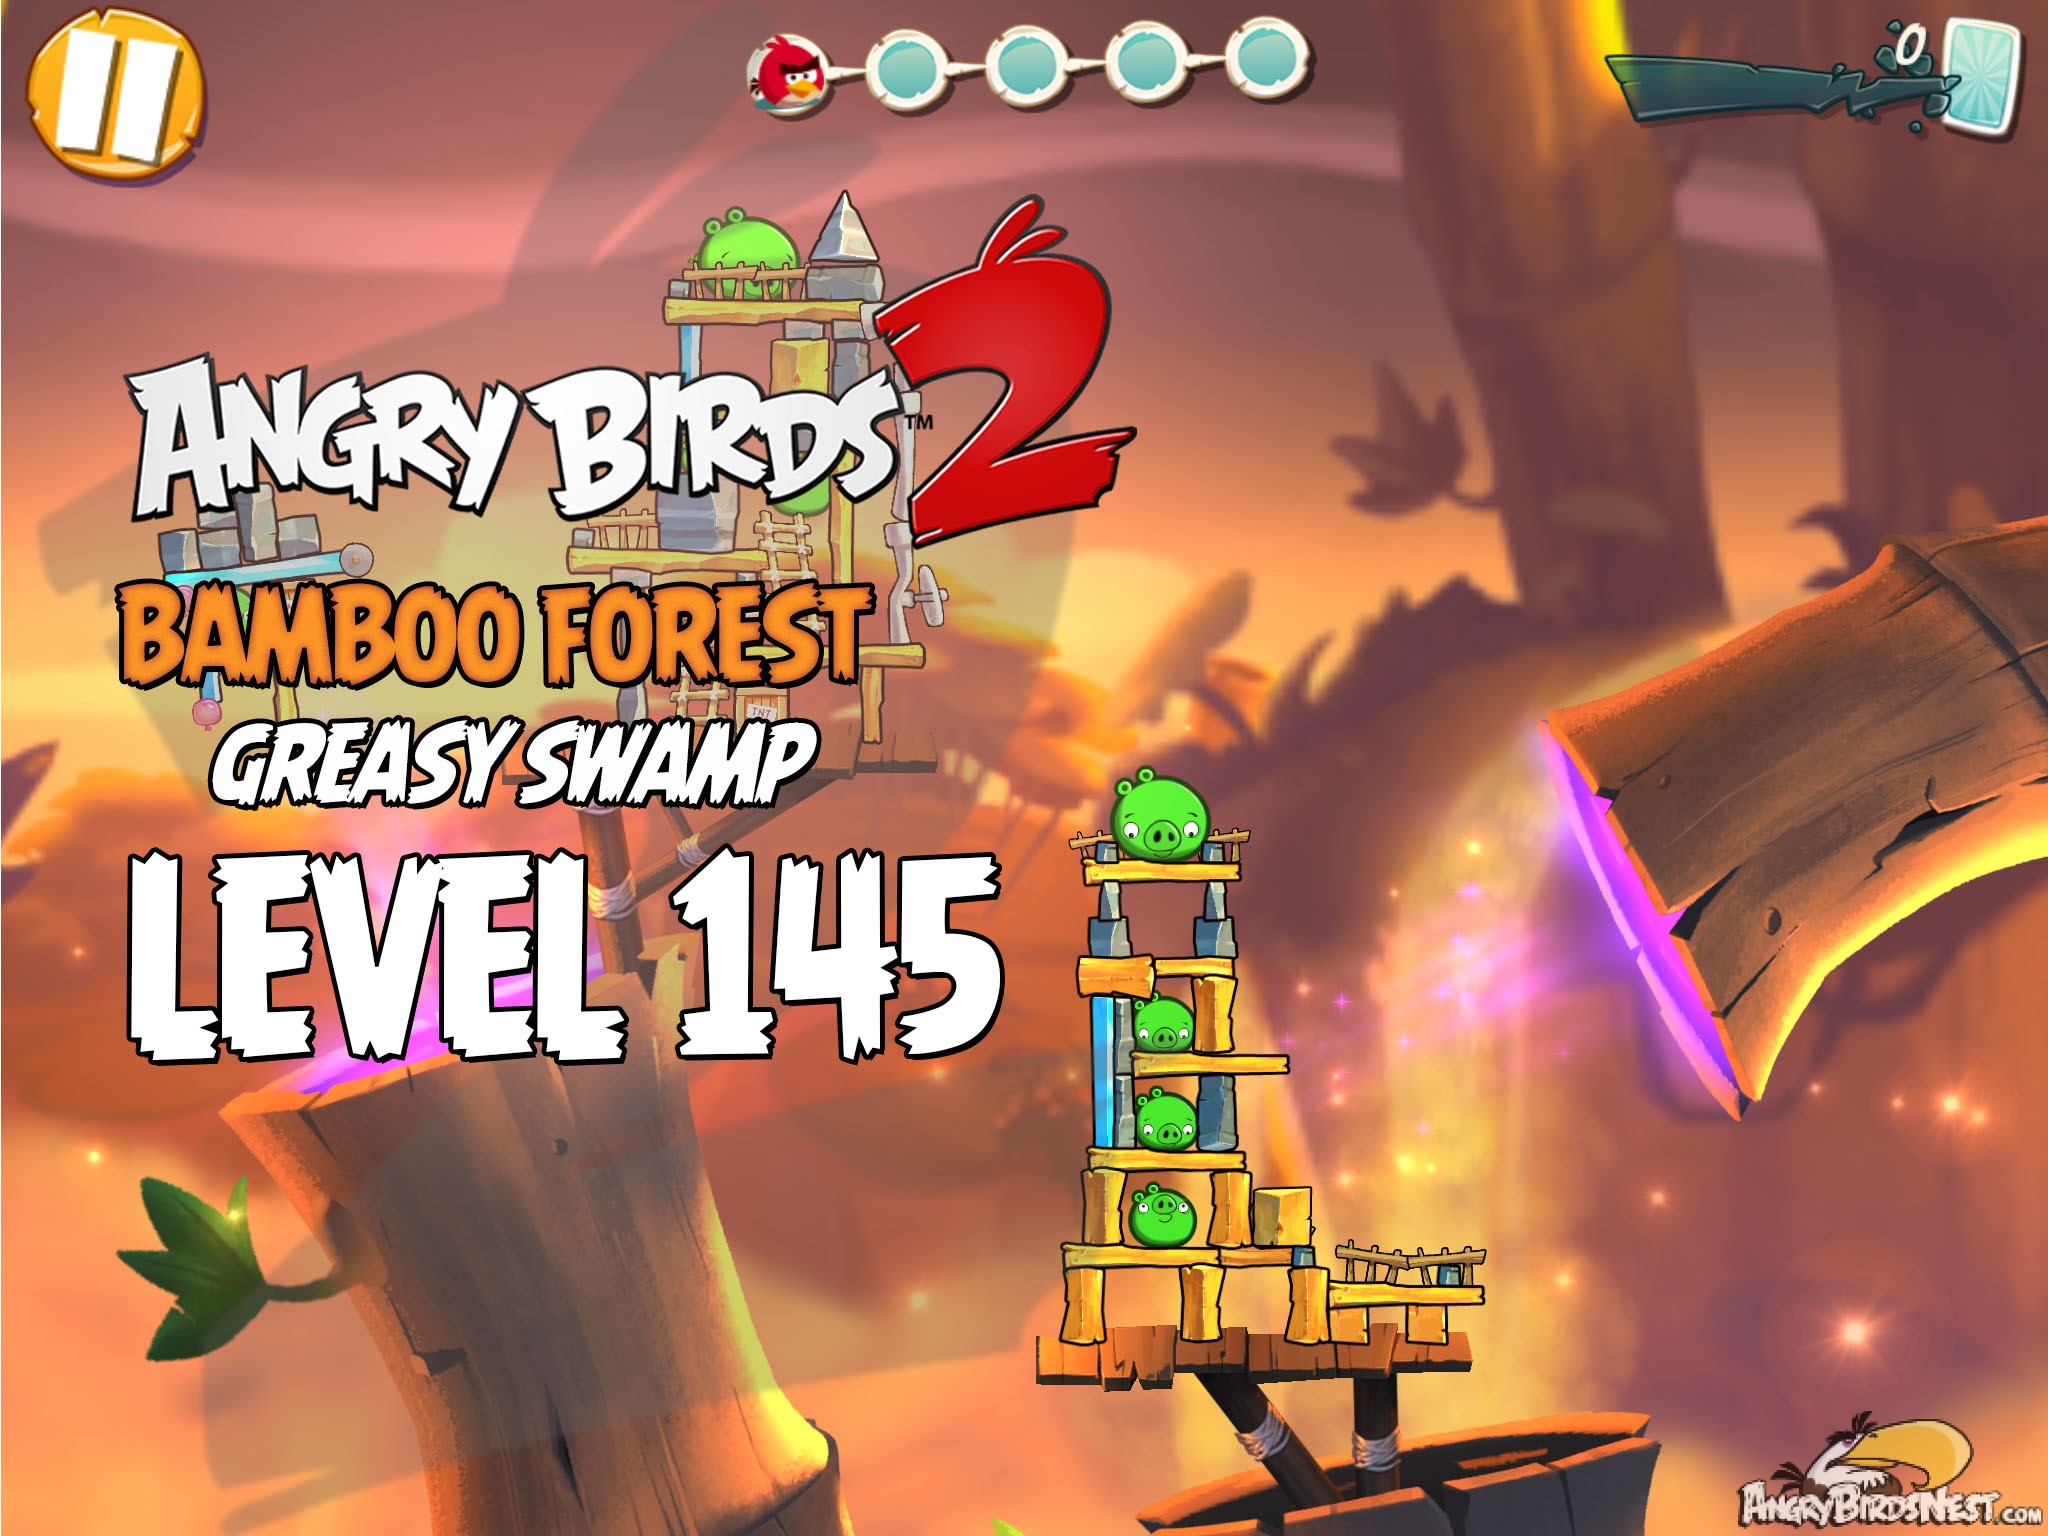 Angry Birds 2 Bamboo Forest Greasy Swamp Level 145